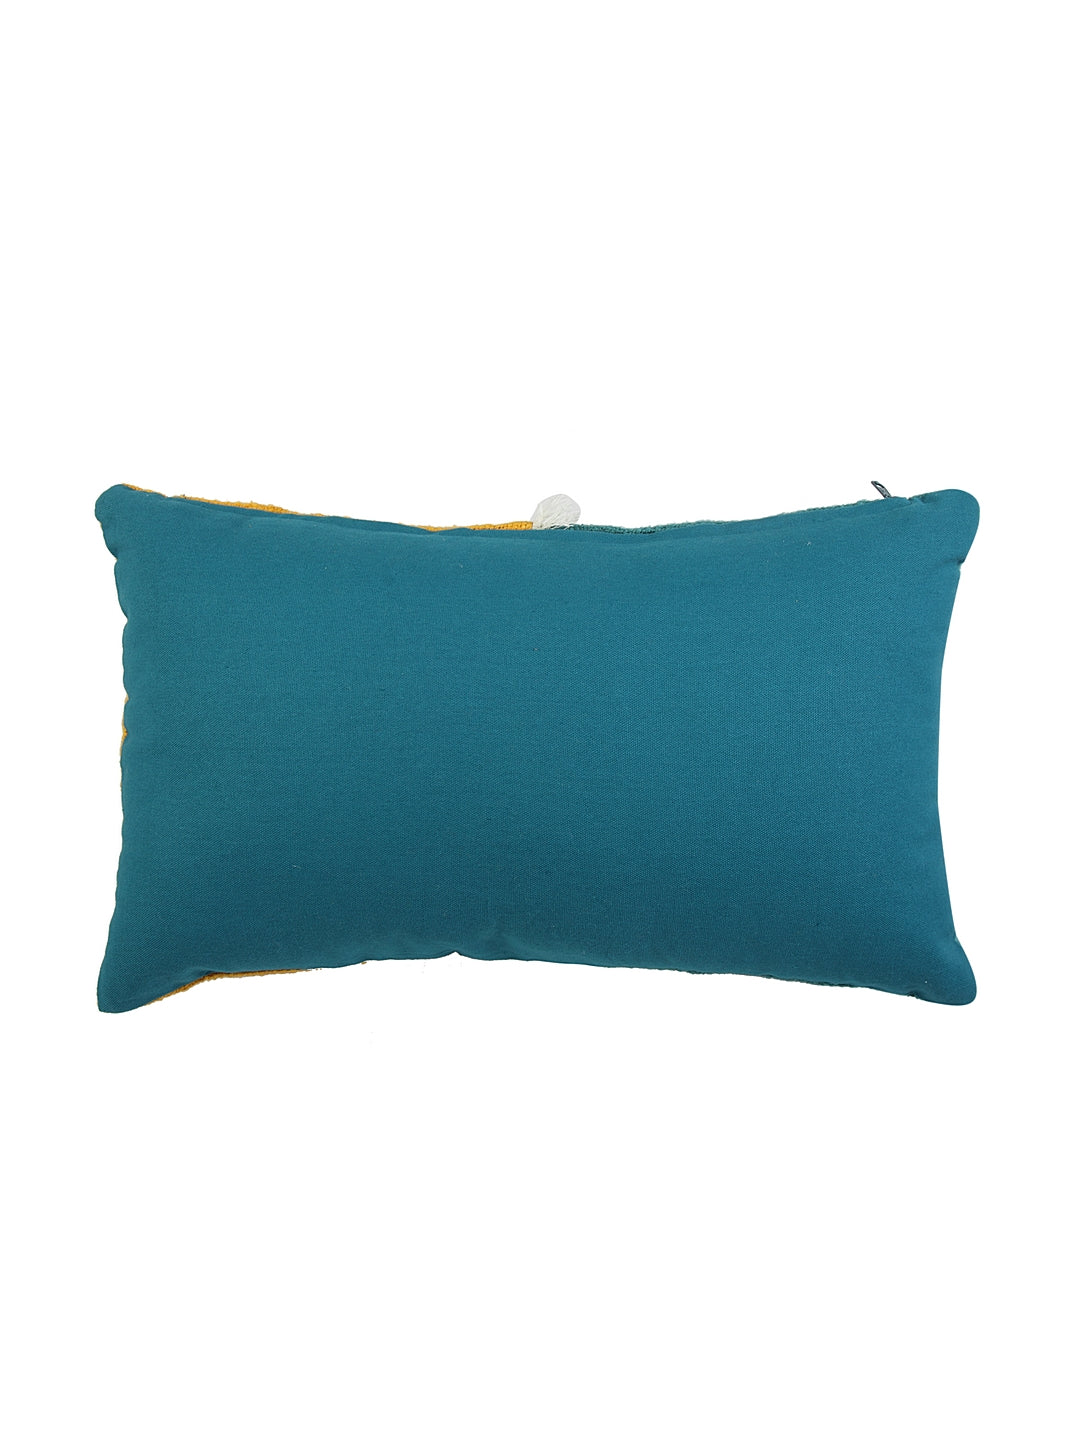 Ochre Peacock Blue Cushion Cover with Filler 30x50cm